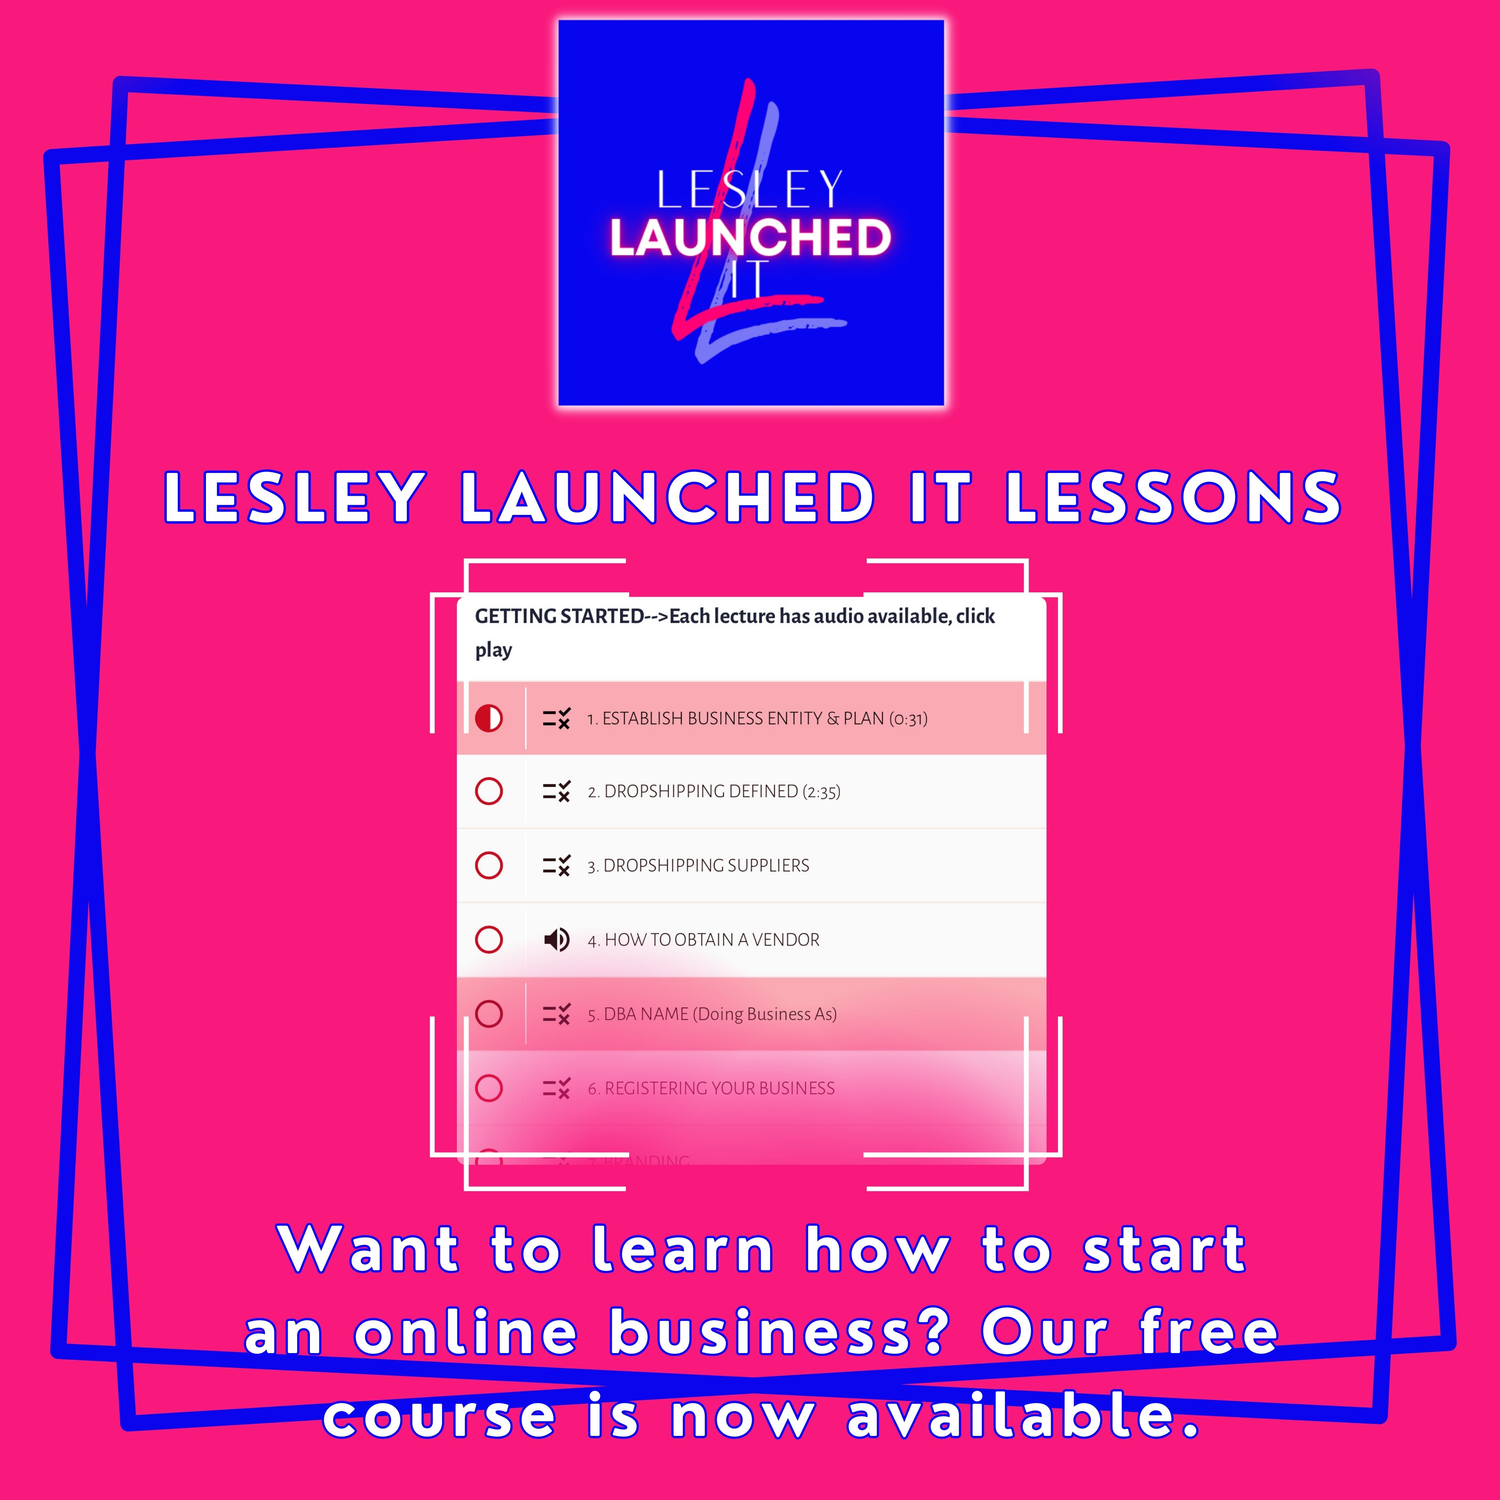 Lesley Launched It Lessons